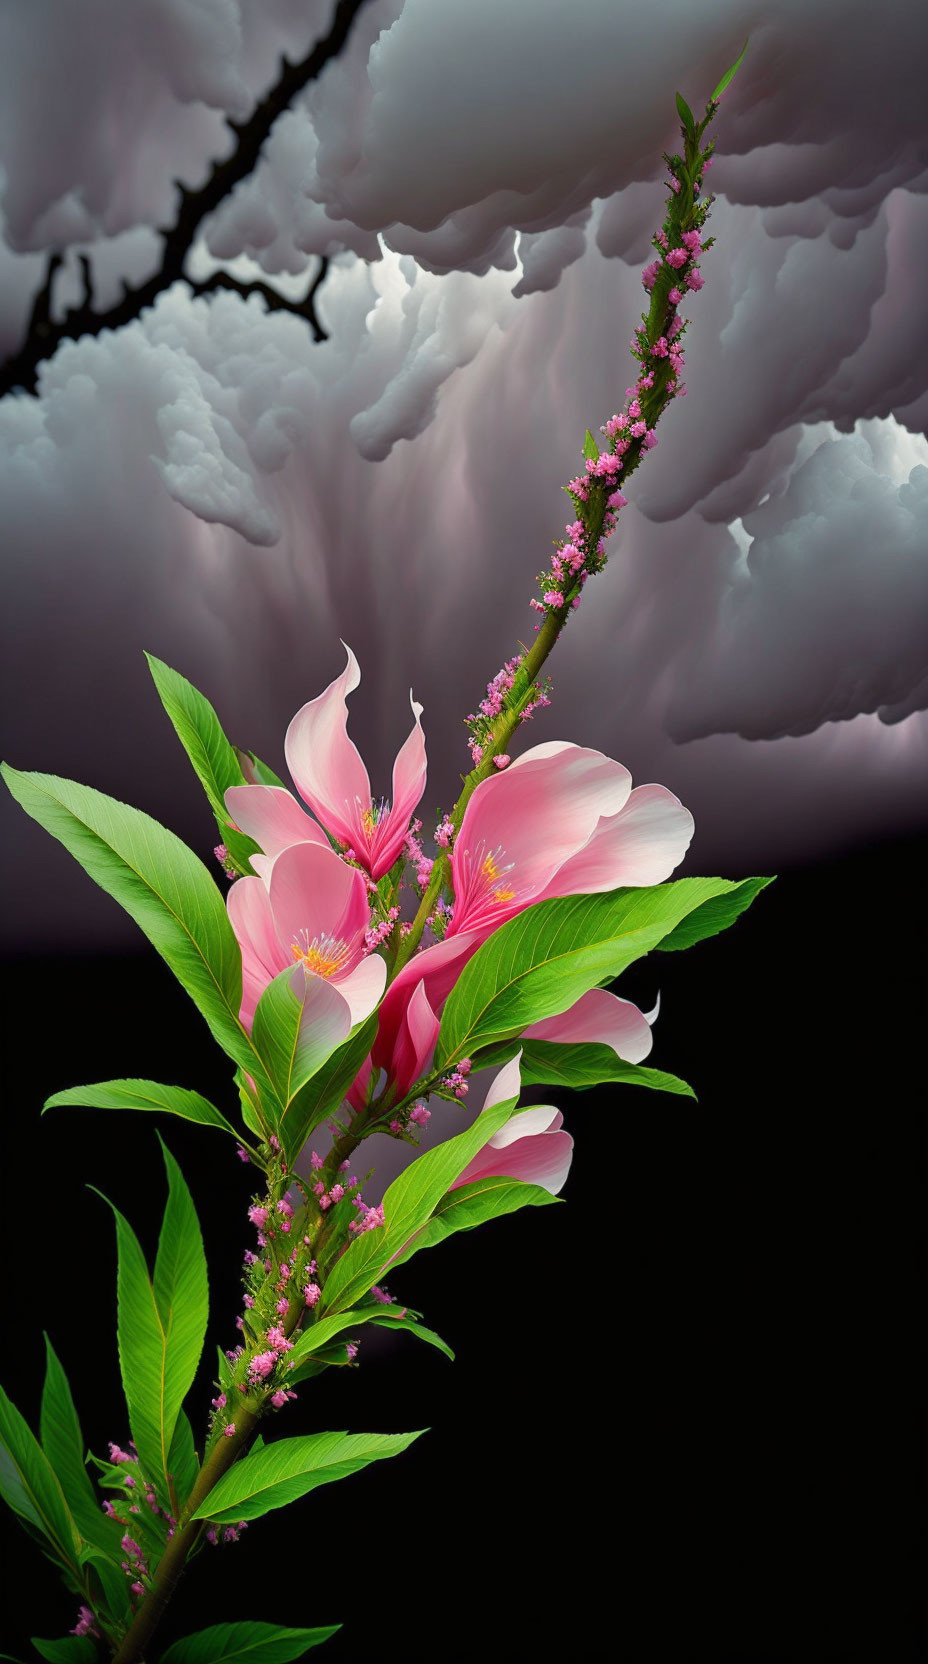 Pink flowers against swirling gray clouds showcase vibrant contrast.